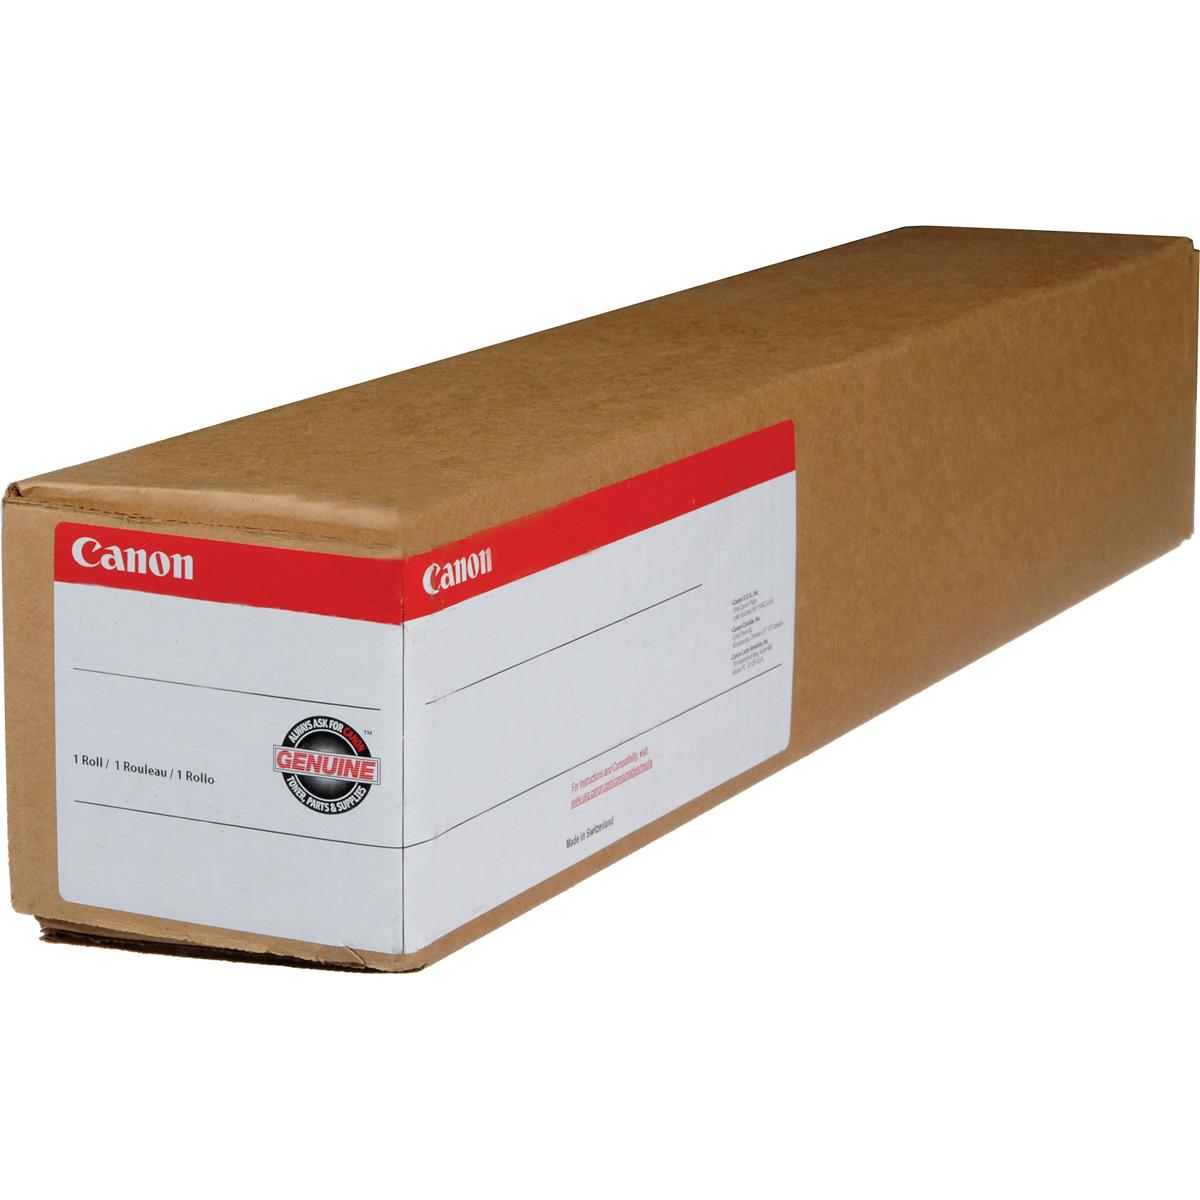 Photos - Office Paper Canon 7mil Glossy Photo Paper 2047V119 (24"x100' Roll)